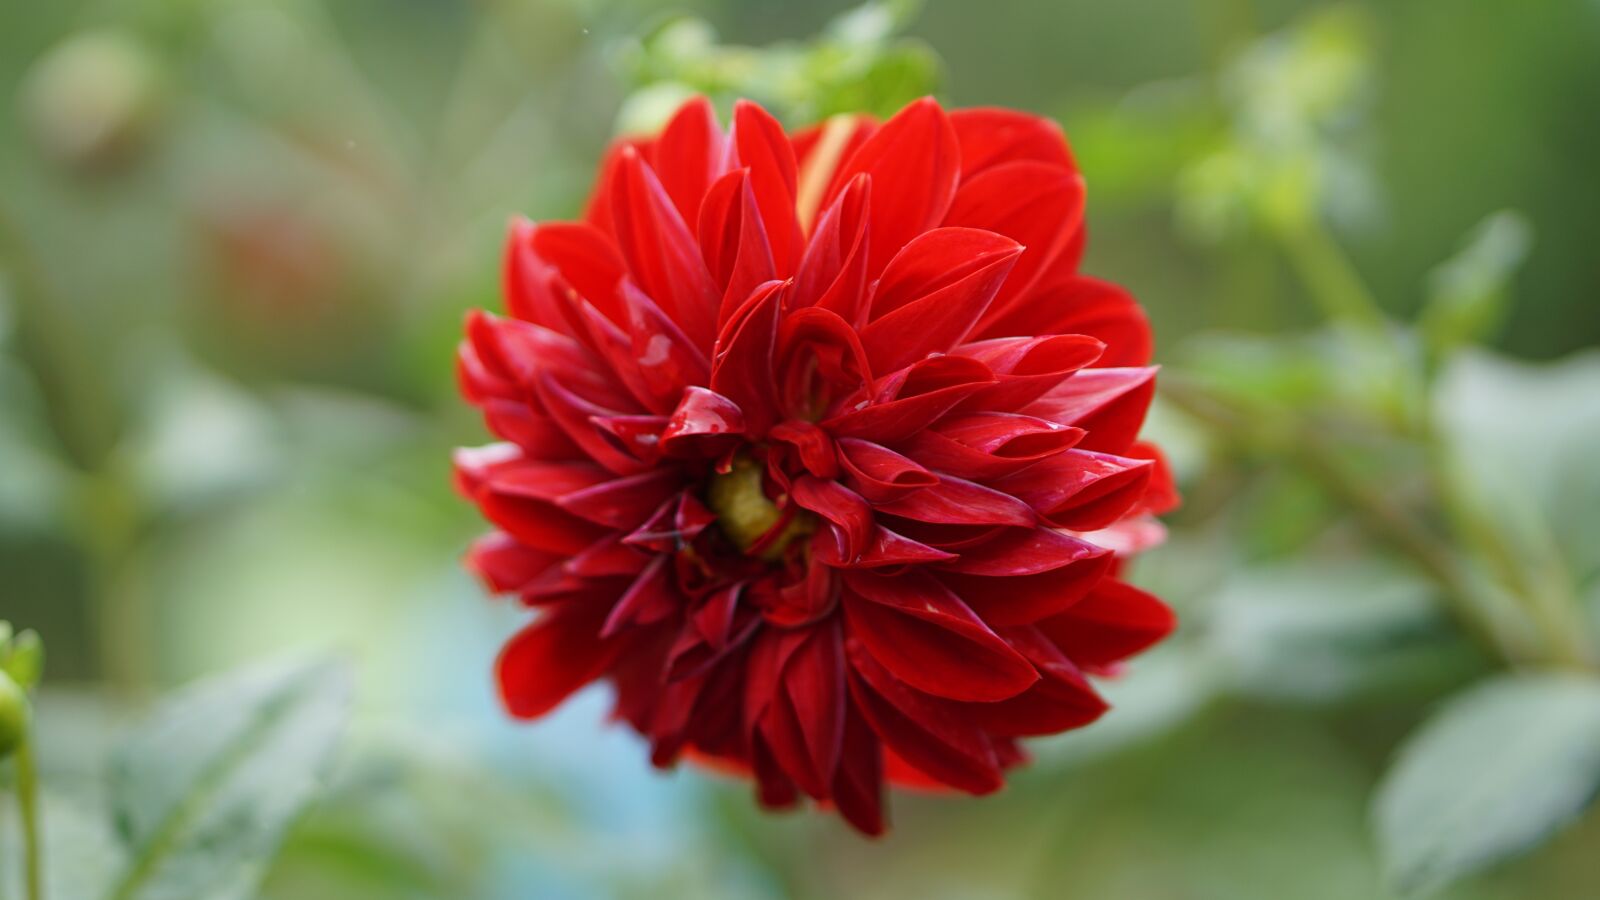 Sony a5100 sample photo. Flower, red, petals photography